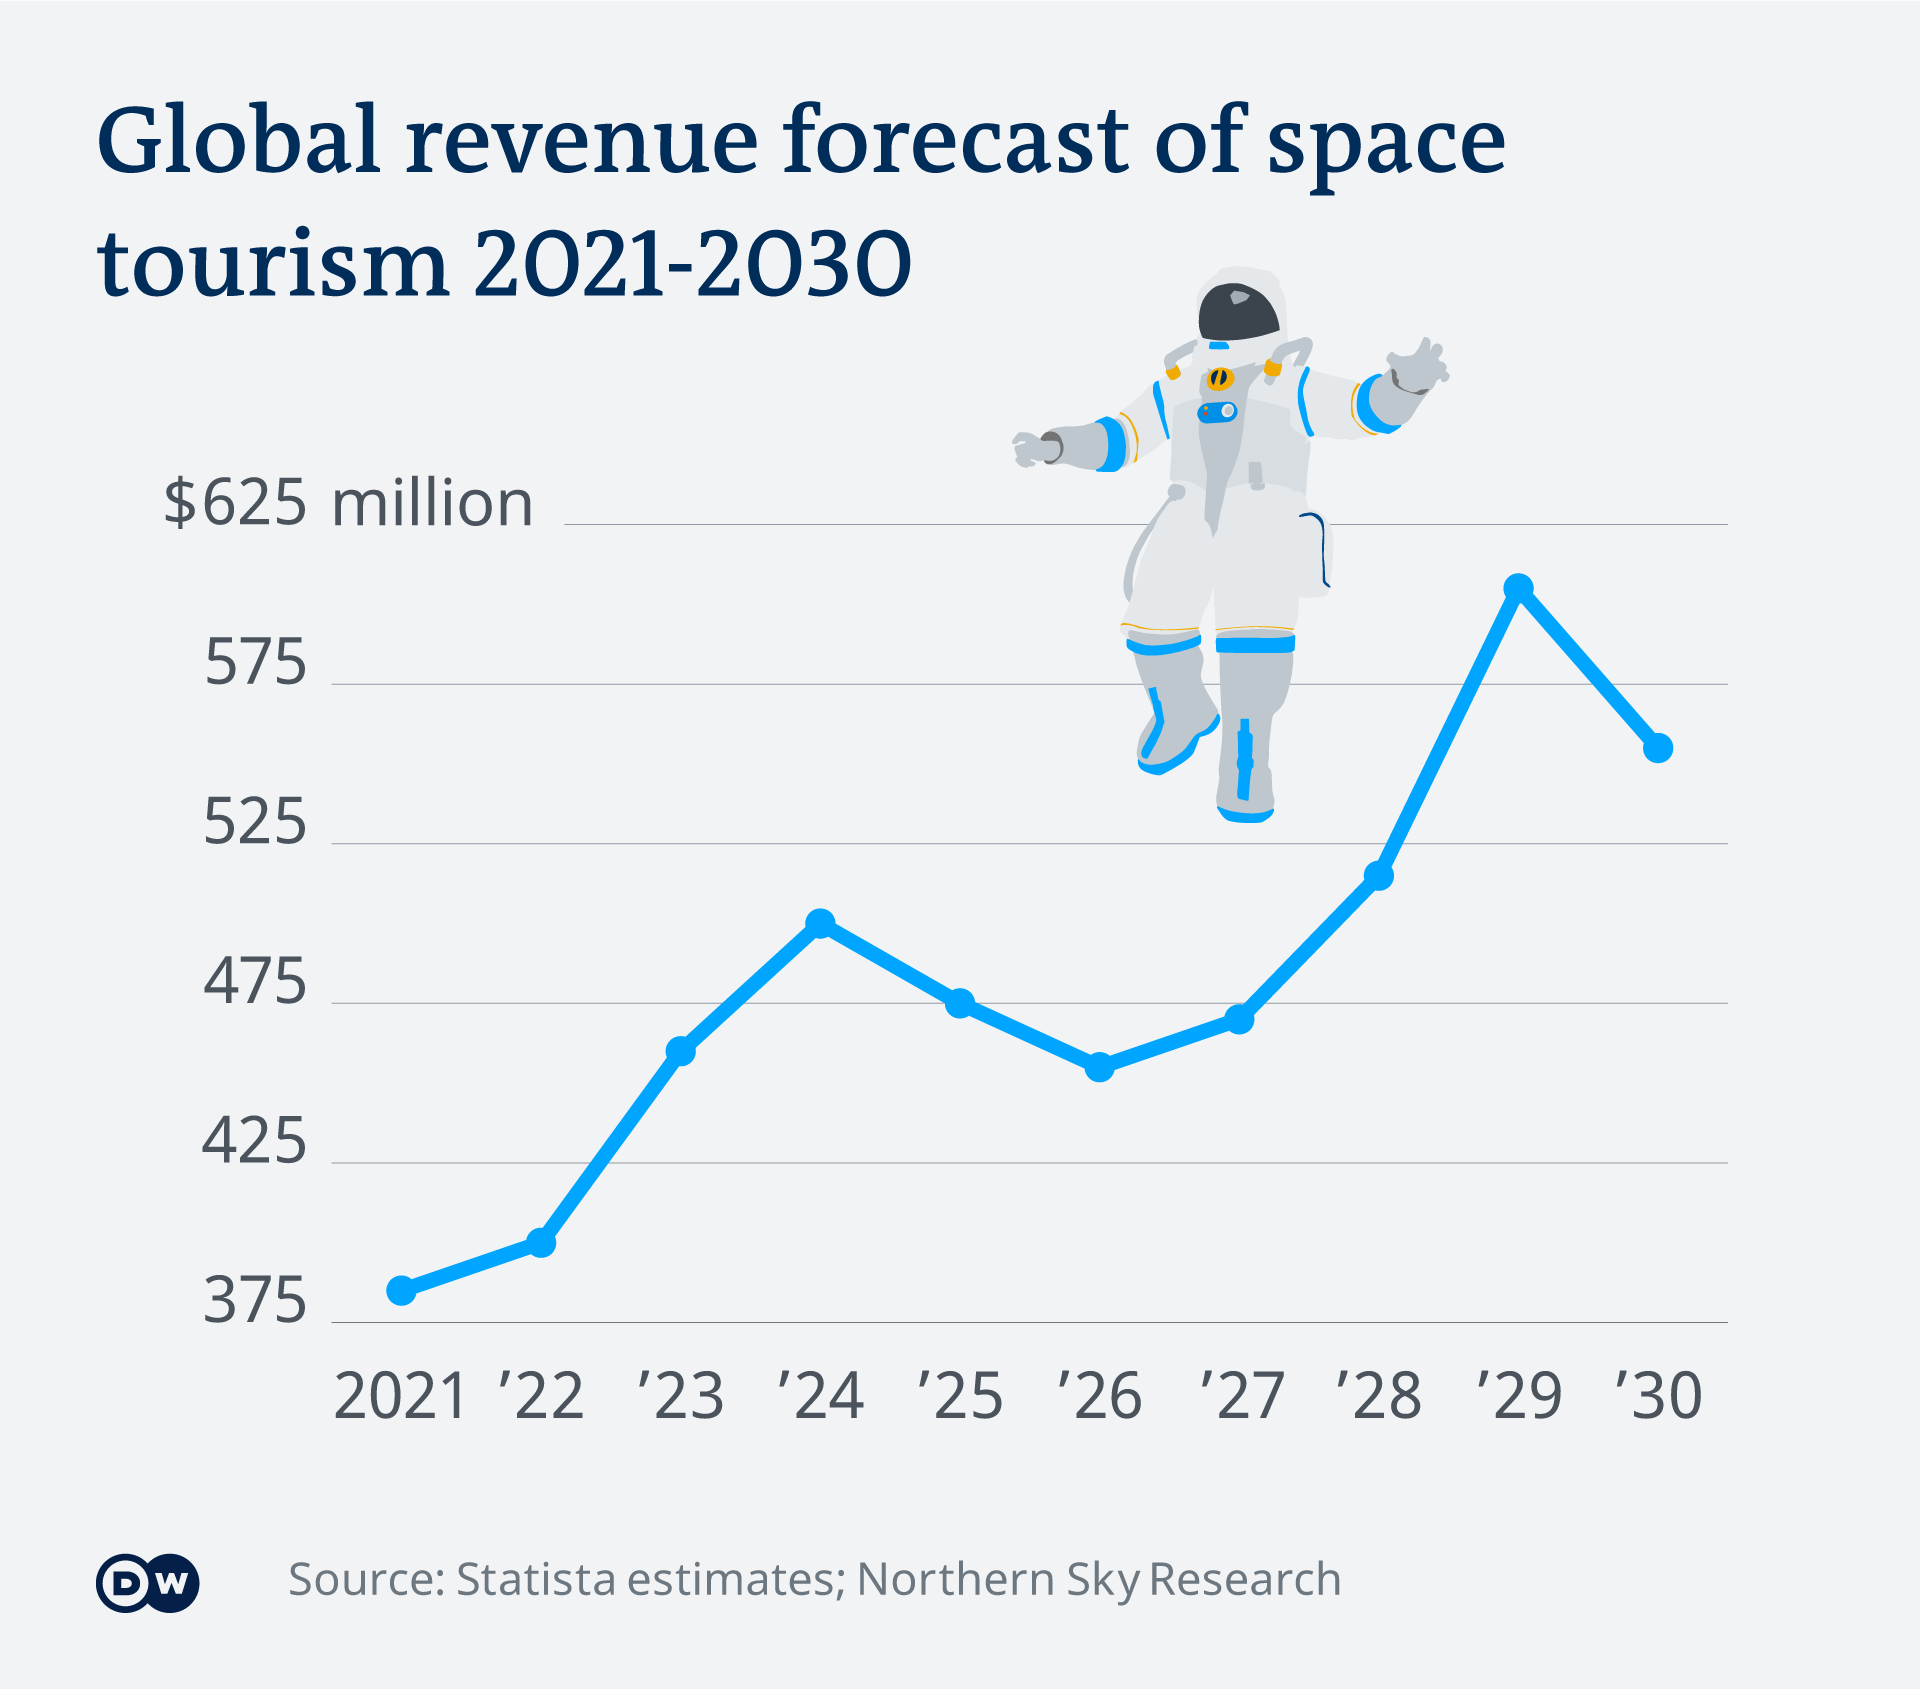 A chart showing revenue forecast of space tourism